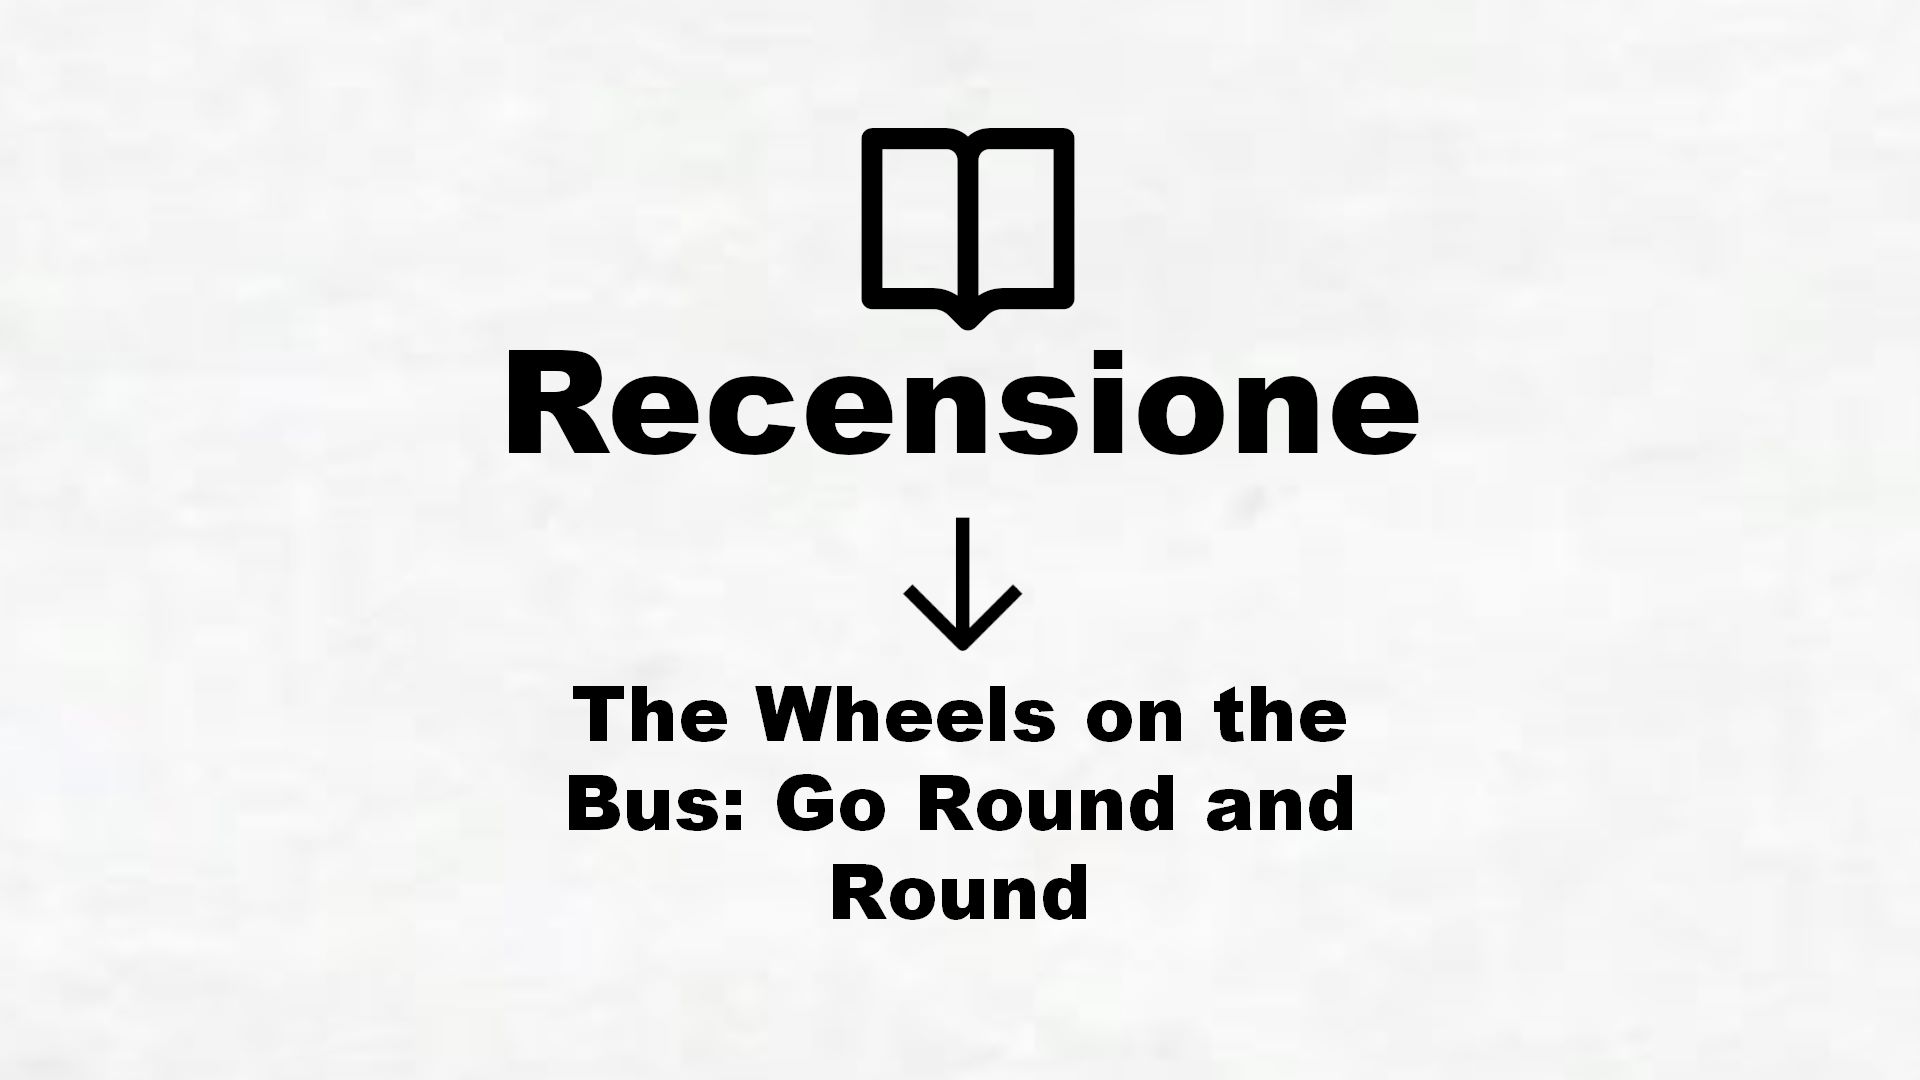 The Wheels on the Bus: Go Round and Round – Recensione Libro